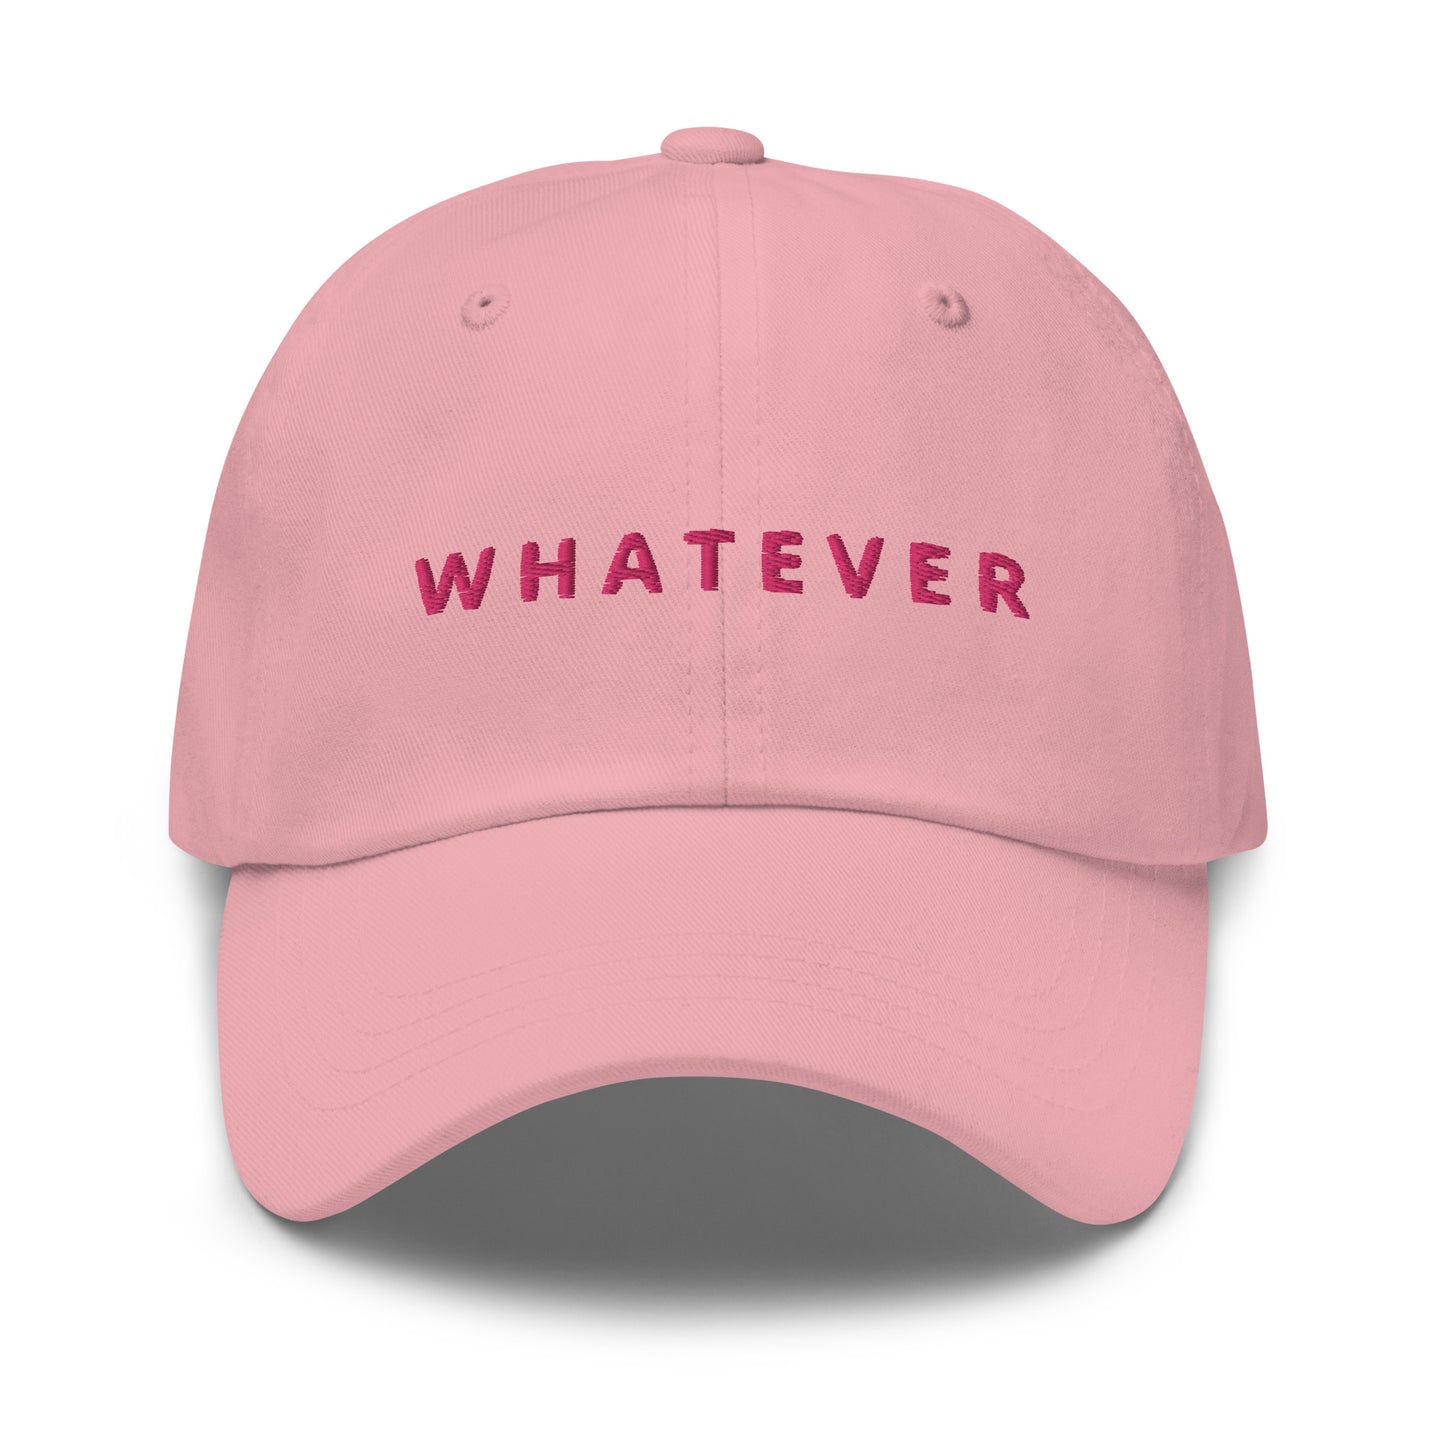 Whatever Love hat by pink power coffee